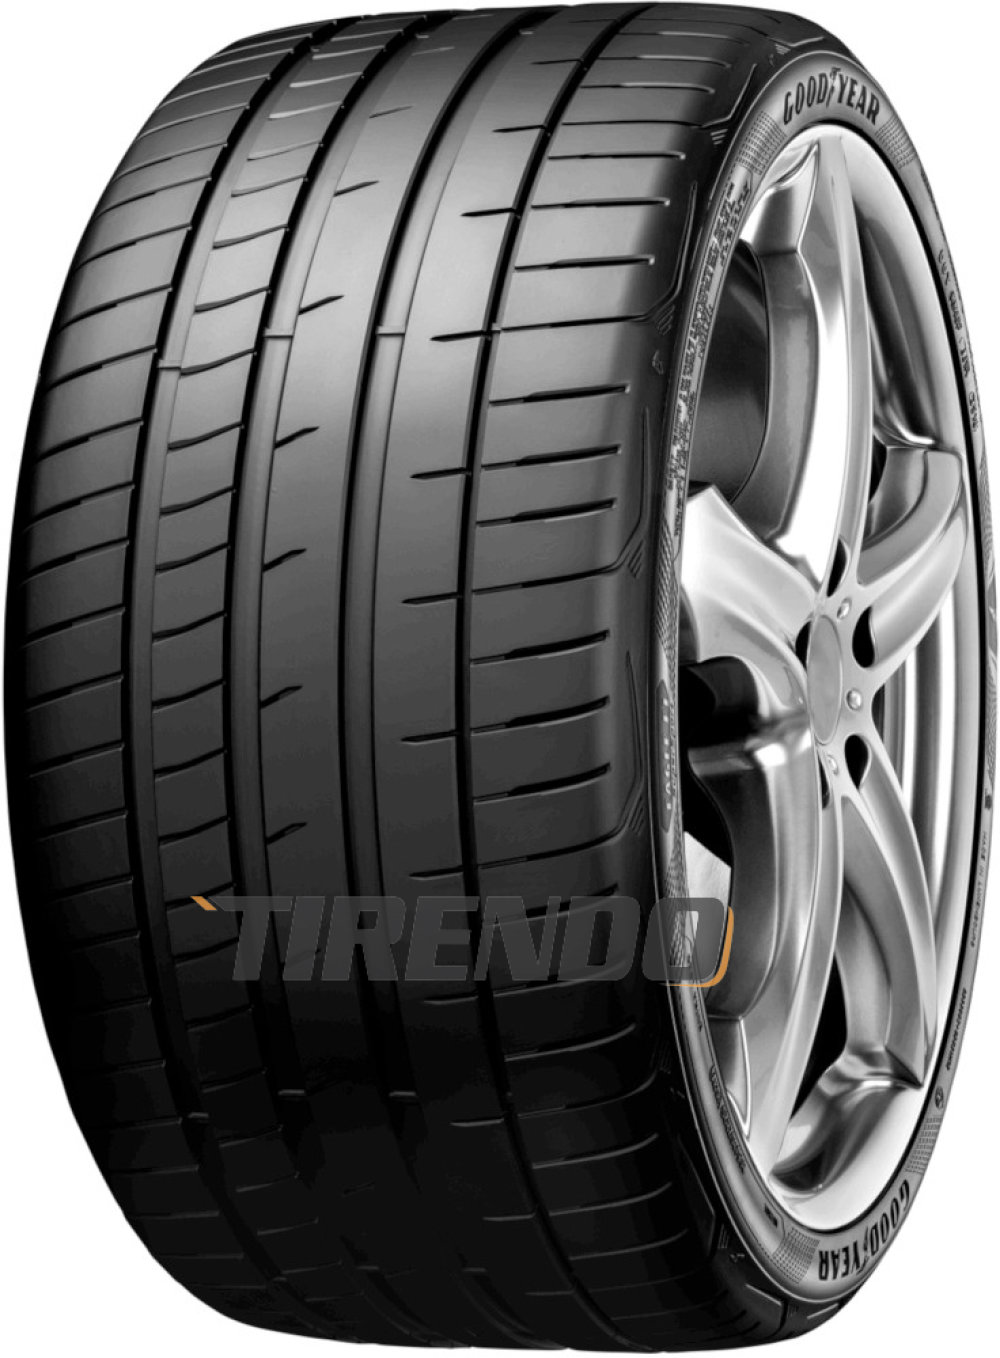 Image of Goodyear Eagle F1 Supersport ( 245/40 R19 98Y XL AO )